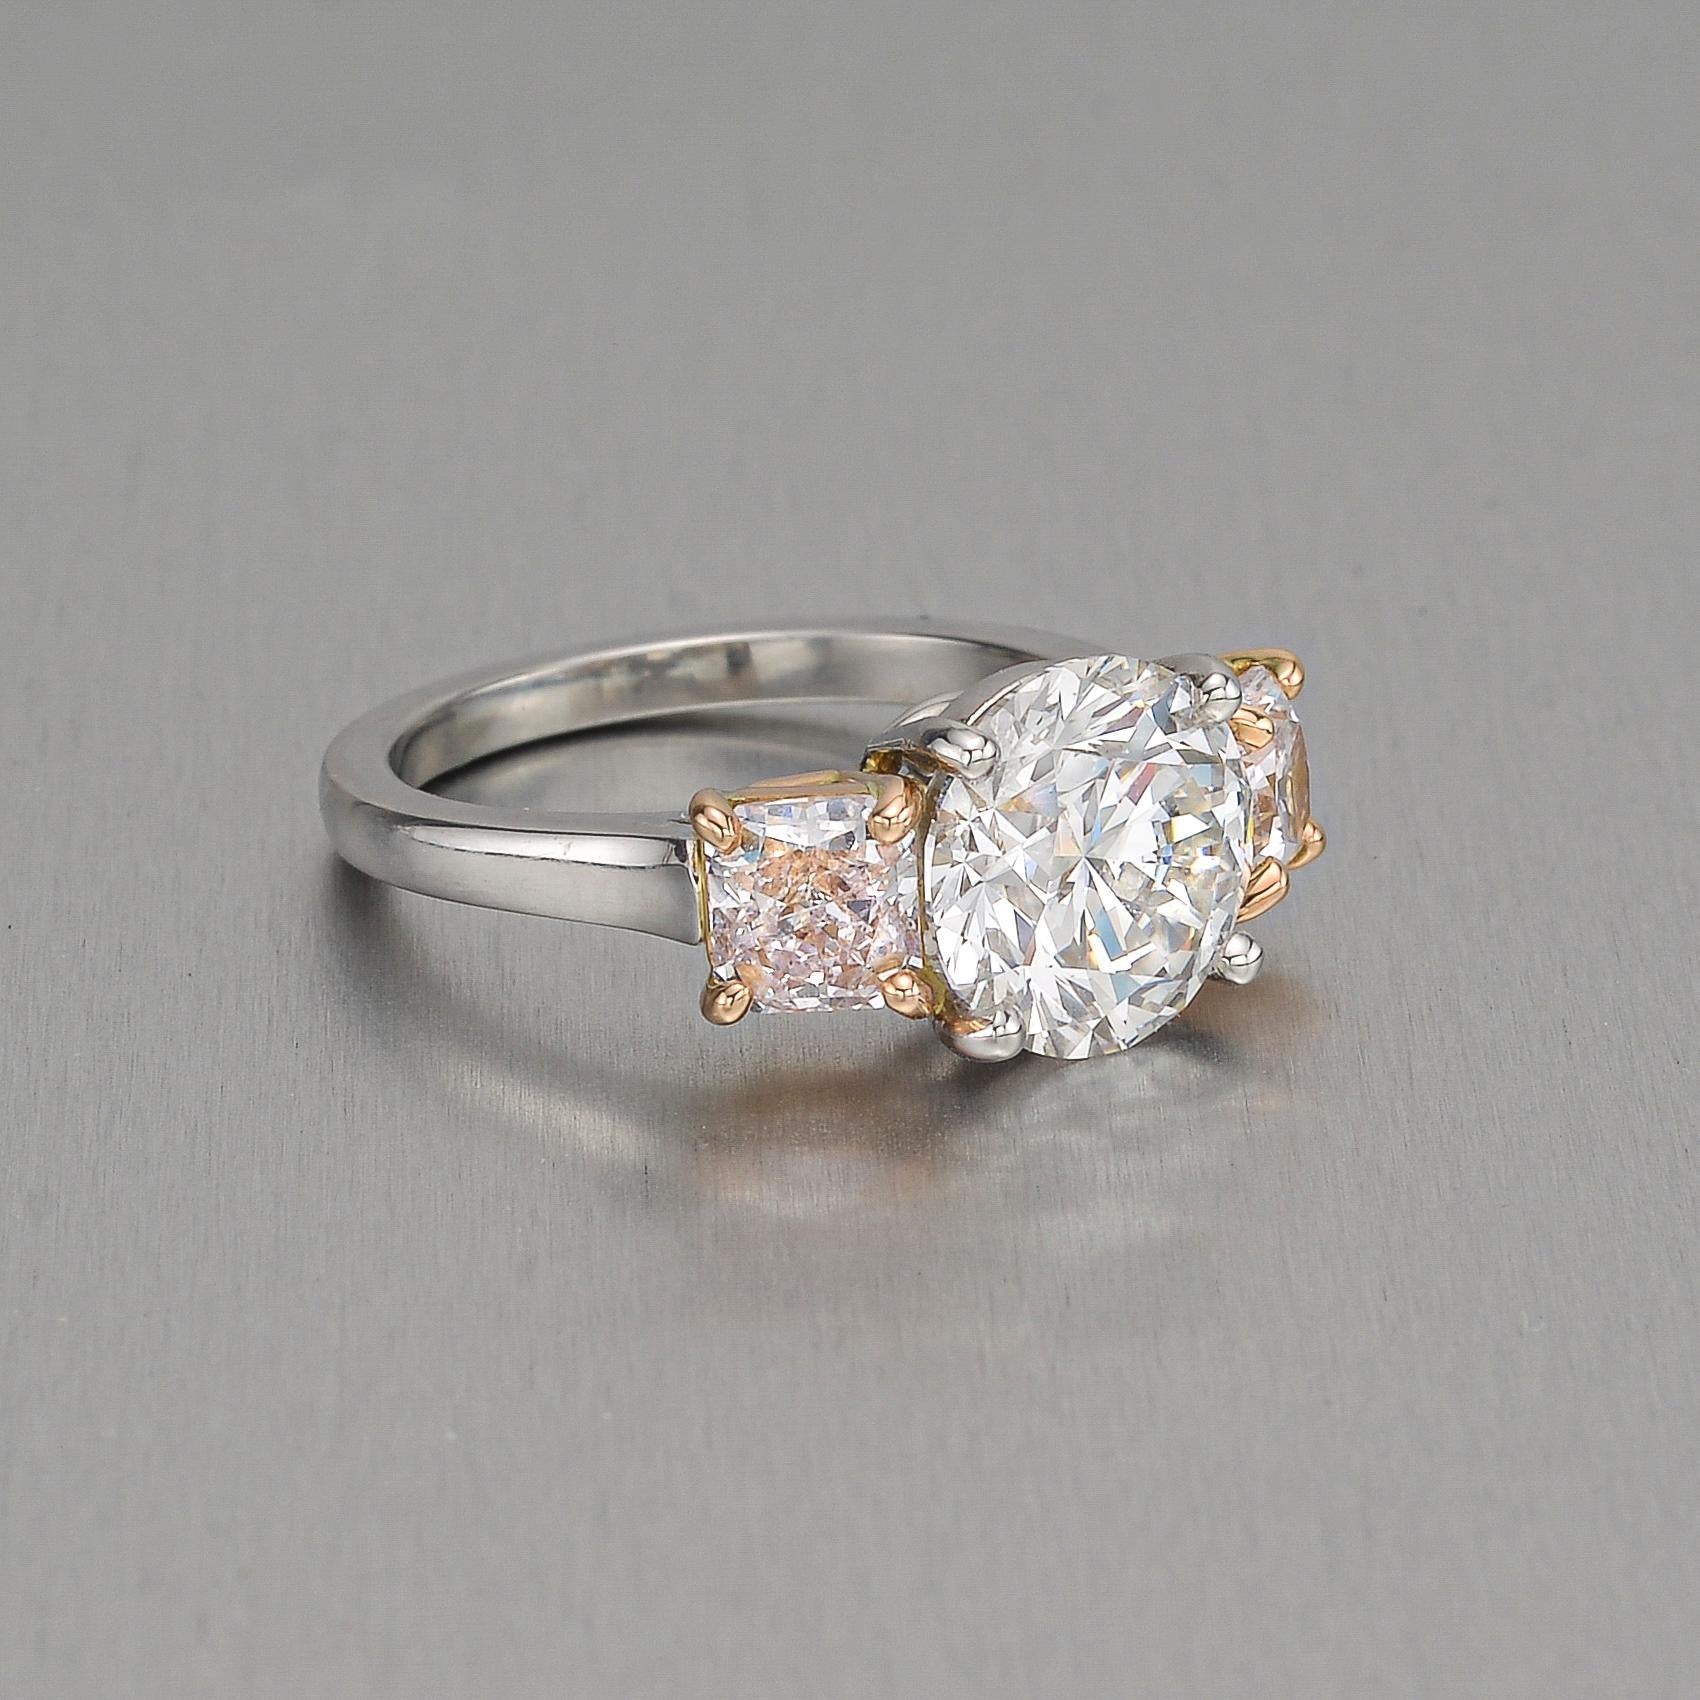 Three-stone engagement ring, centering a fine near-colorless round brilliant-cut diamond weighing 2.51 carats with radiant-cut natural fancy very light pink diamond sides, in a platinum and 18k pink gold mounting.

Two very light pink diamonds